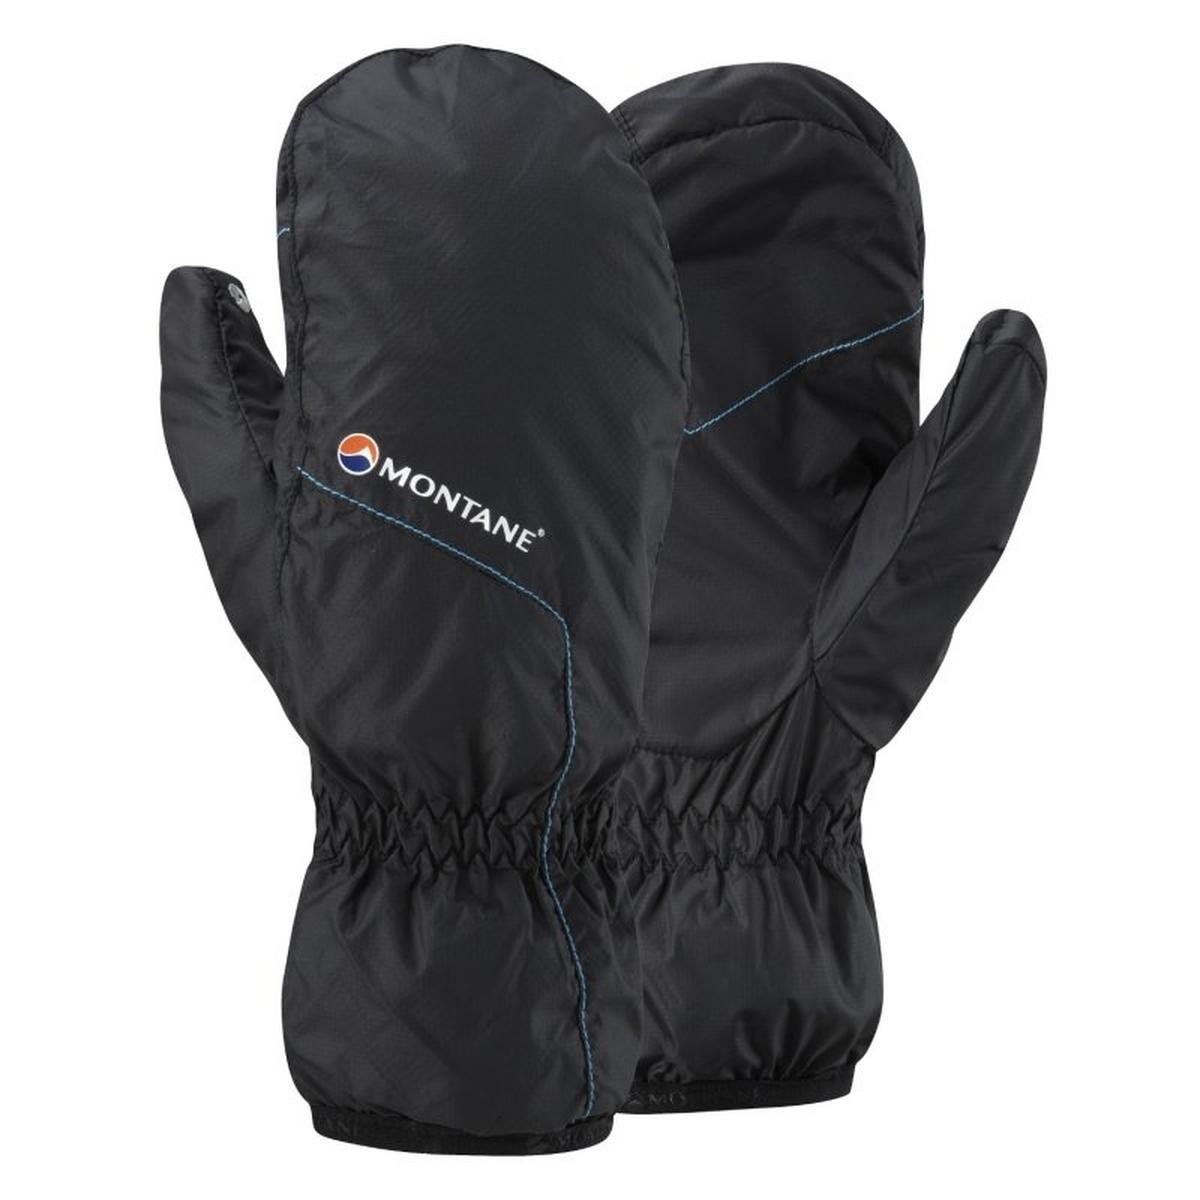 Montane INSULATED Mitts Men's Prism Black/Blue Spark